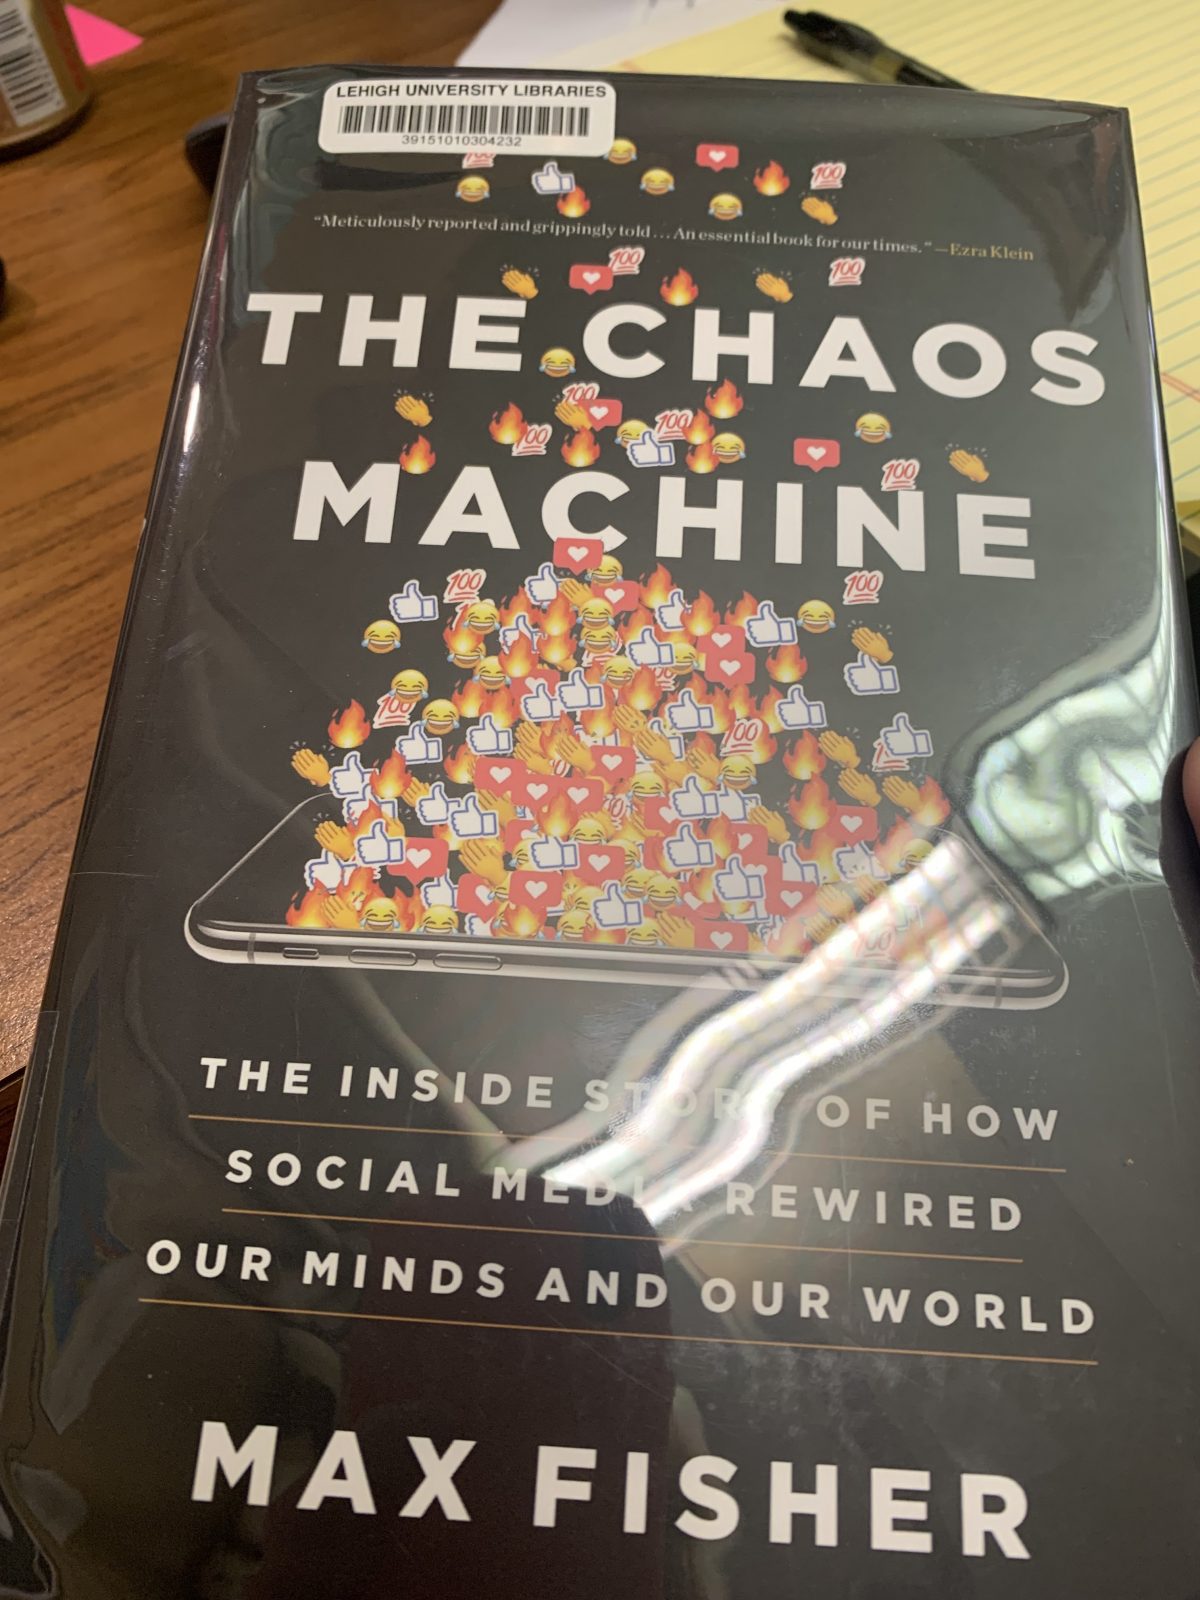 The Chaos Machine, by Max Fisher